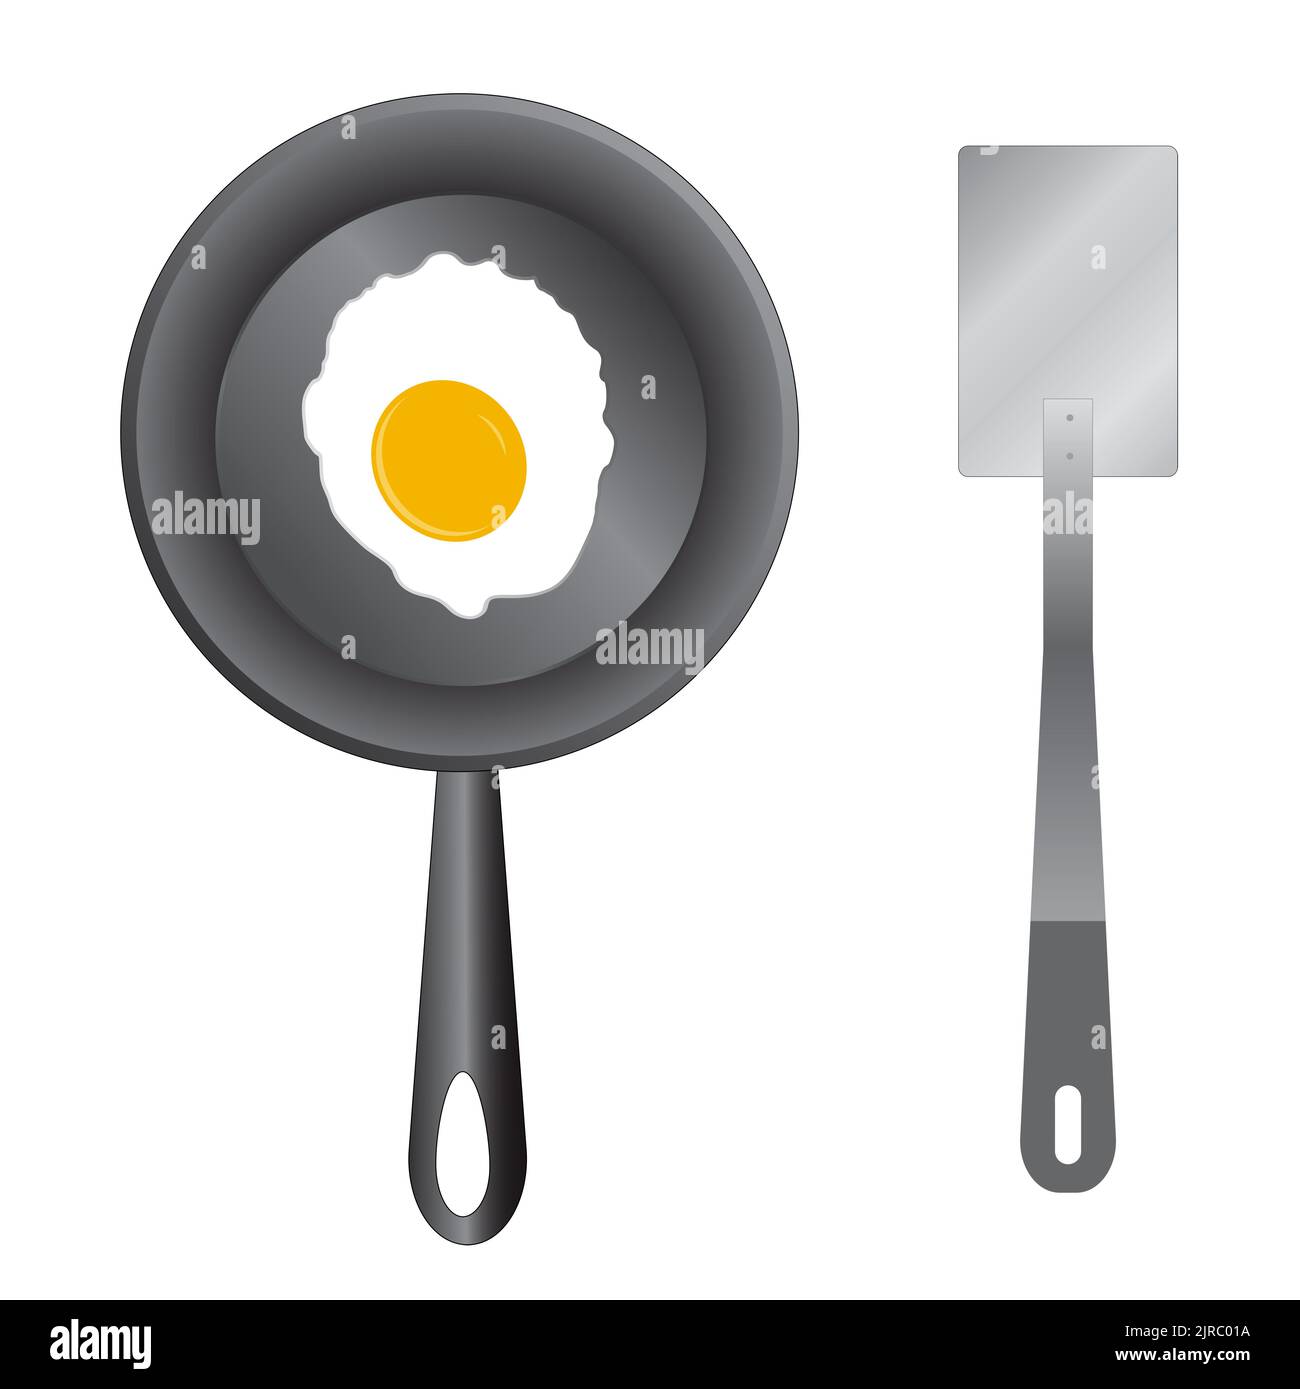 Sunny side up fried egg on a black skillet with a metal spatula - Illustration Stock Photo